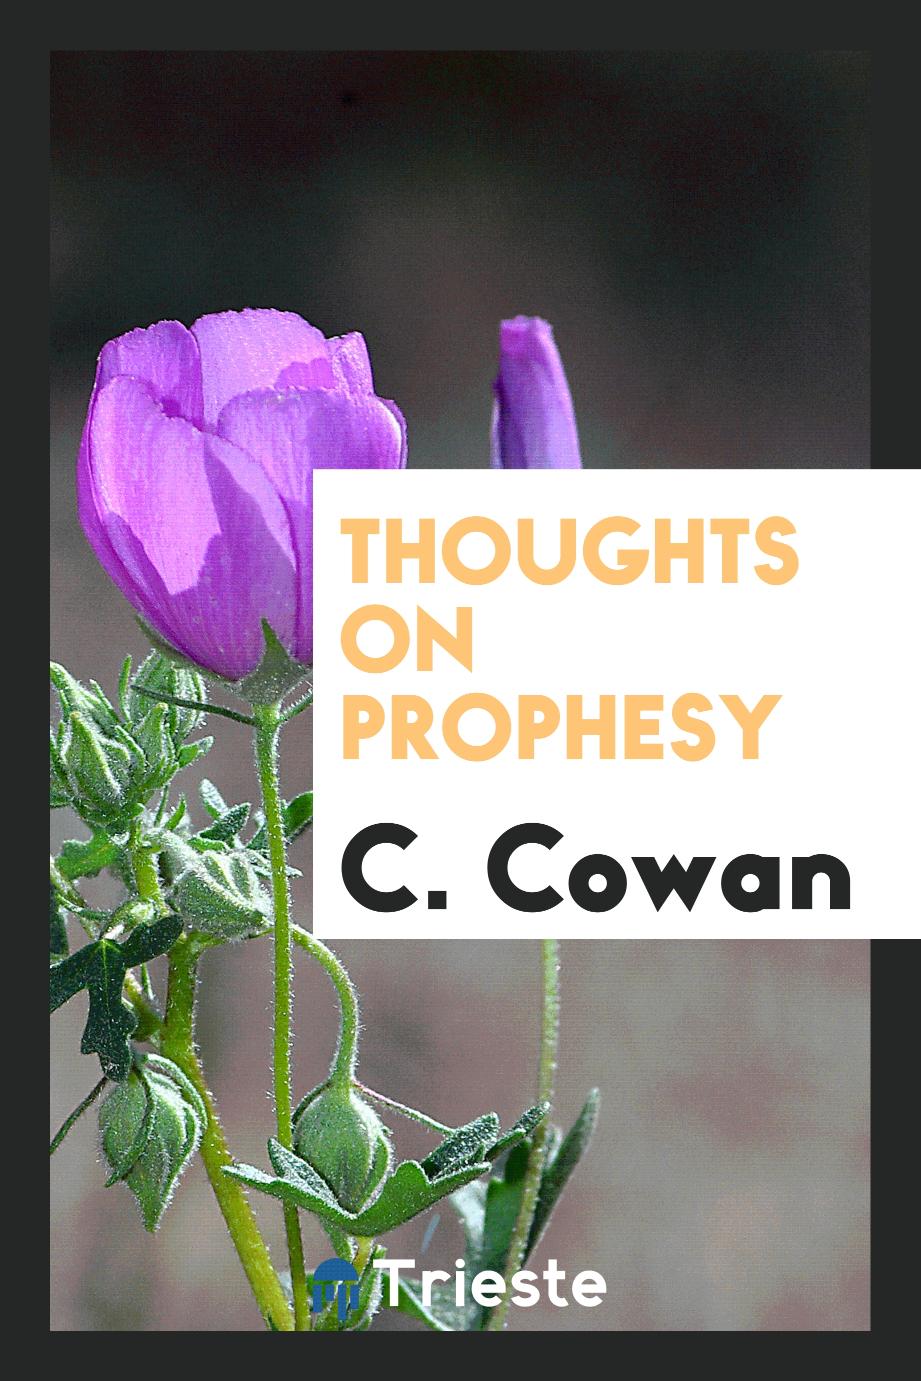 Thoughts on Prophesy